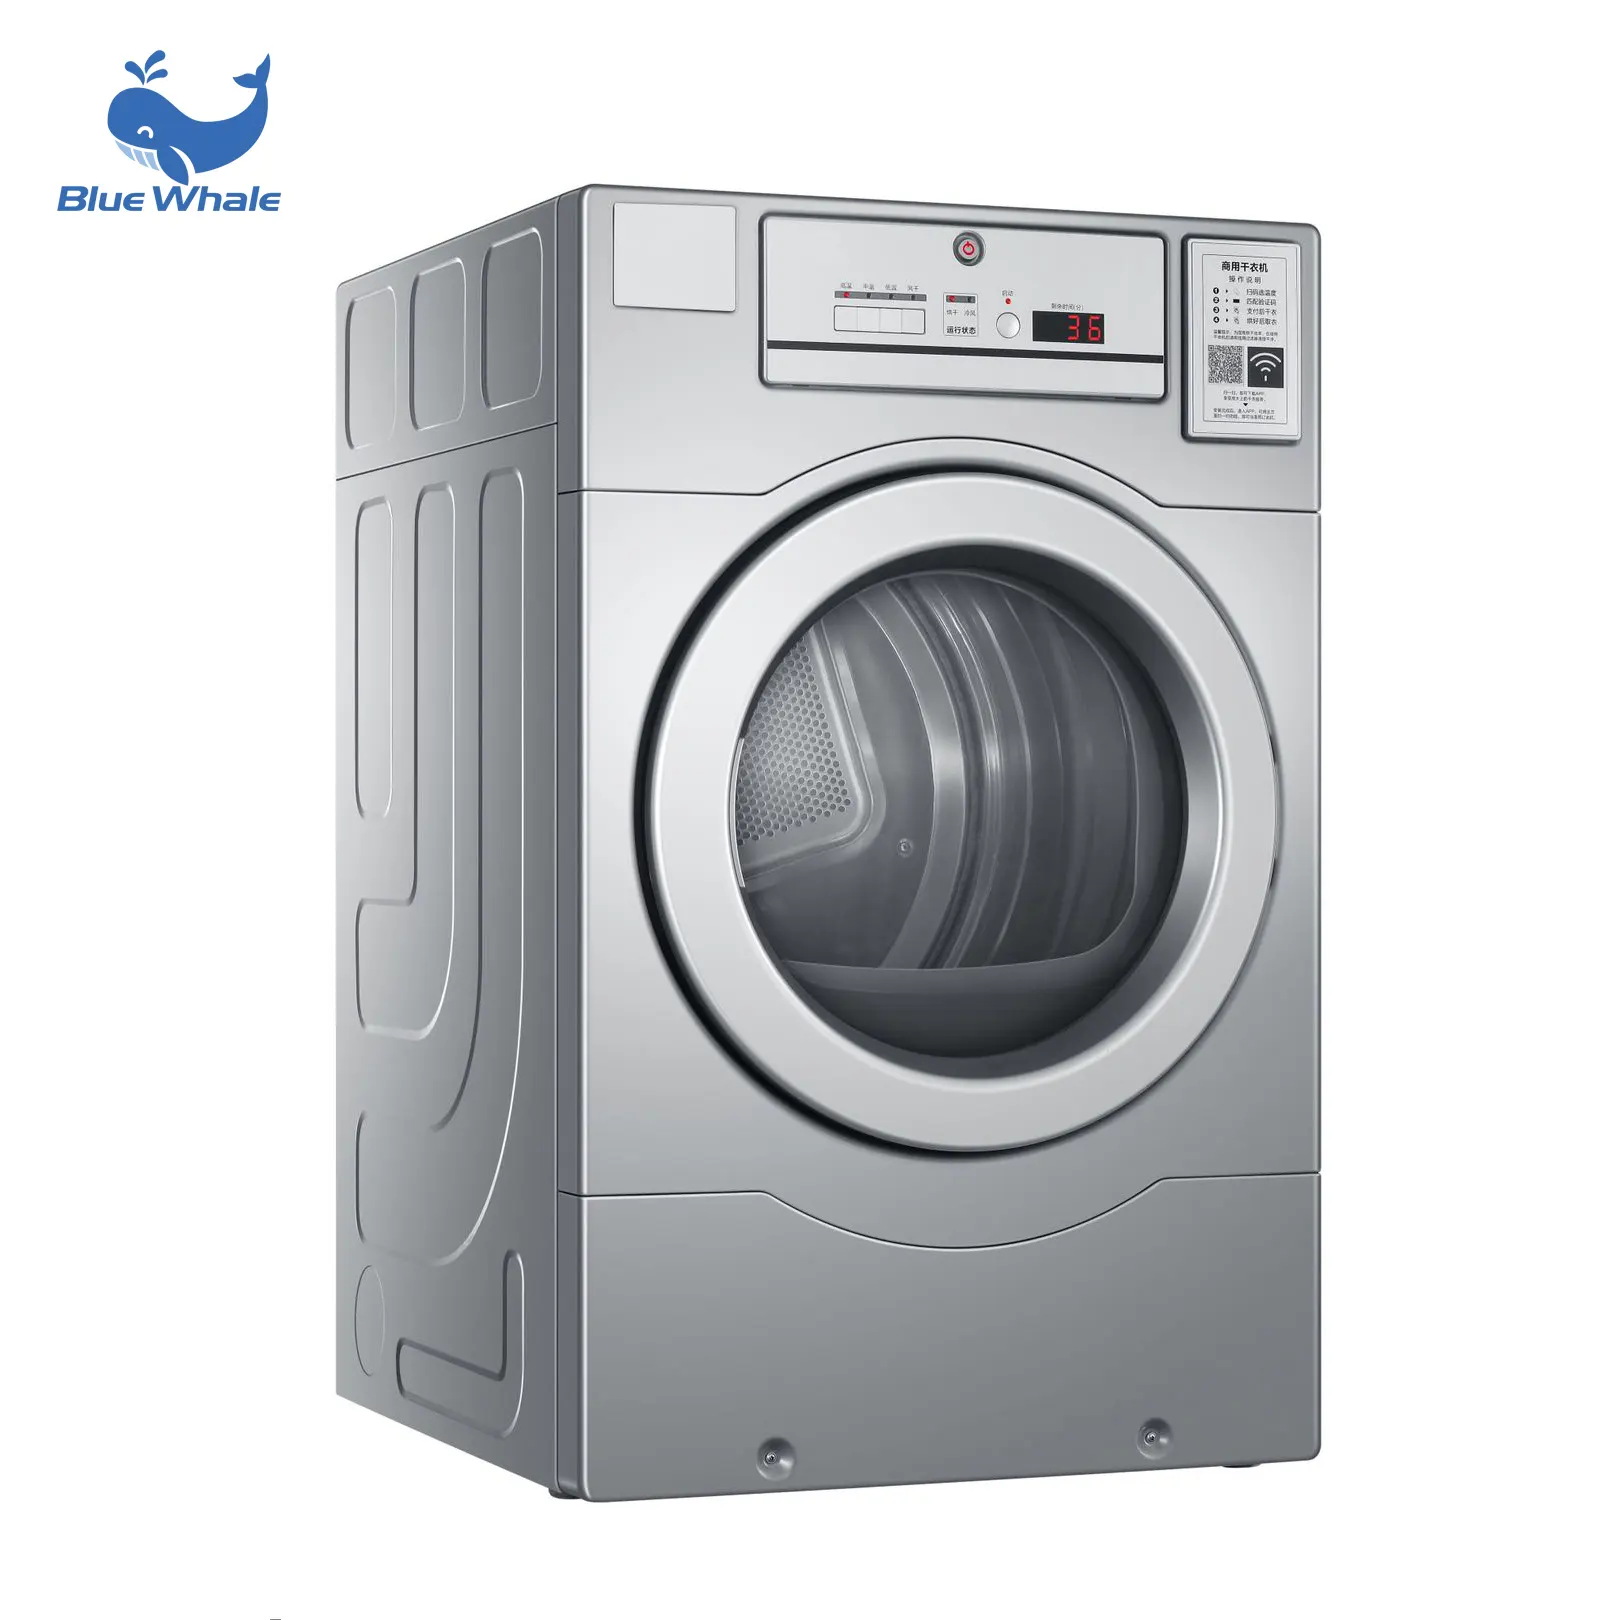 Coin Laundry Washing Machine Commercial Appliances Washer And Dryer Stacked Machine Sets